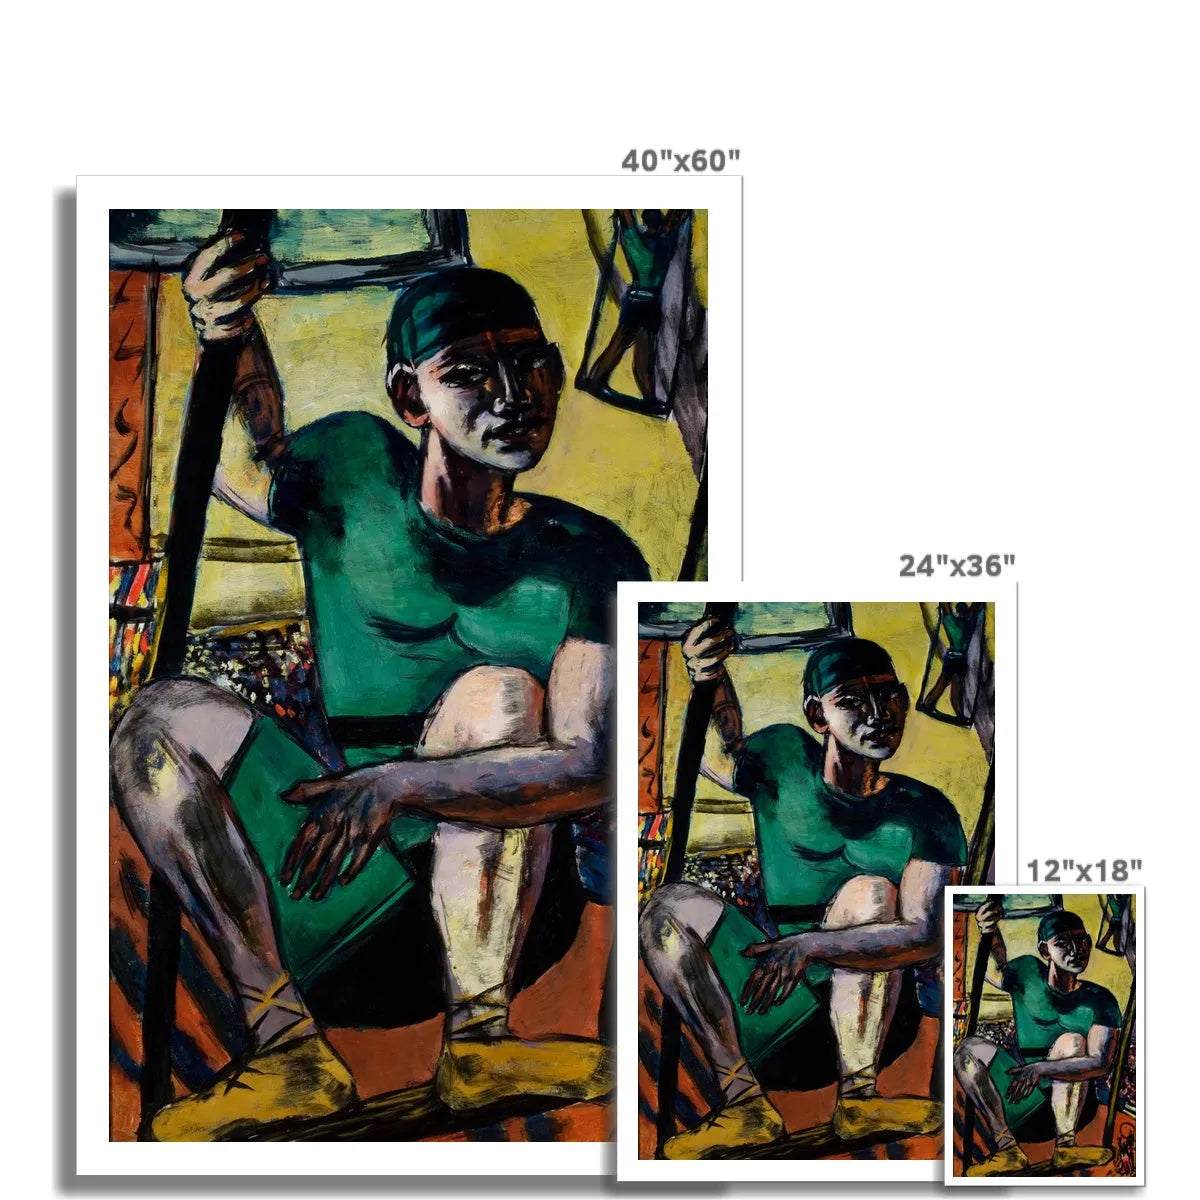 Acrobat On The Trapeze By Max Beckmann Fine Art Print - Posters Prints & Visual Artwork - Aesthetic Art